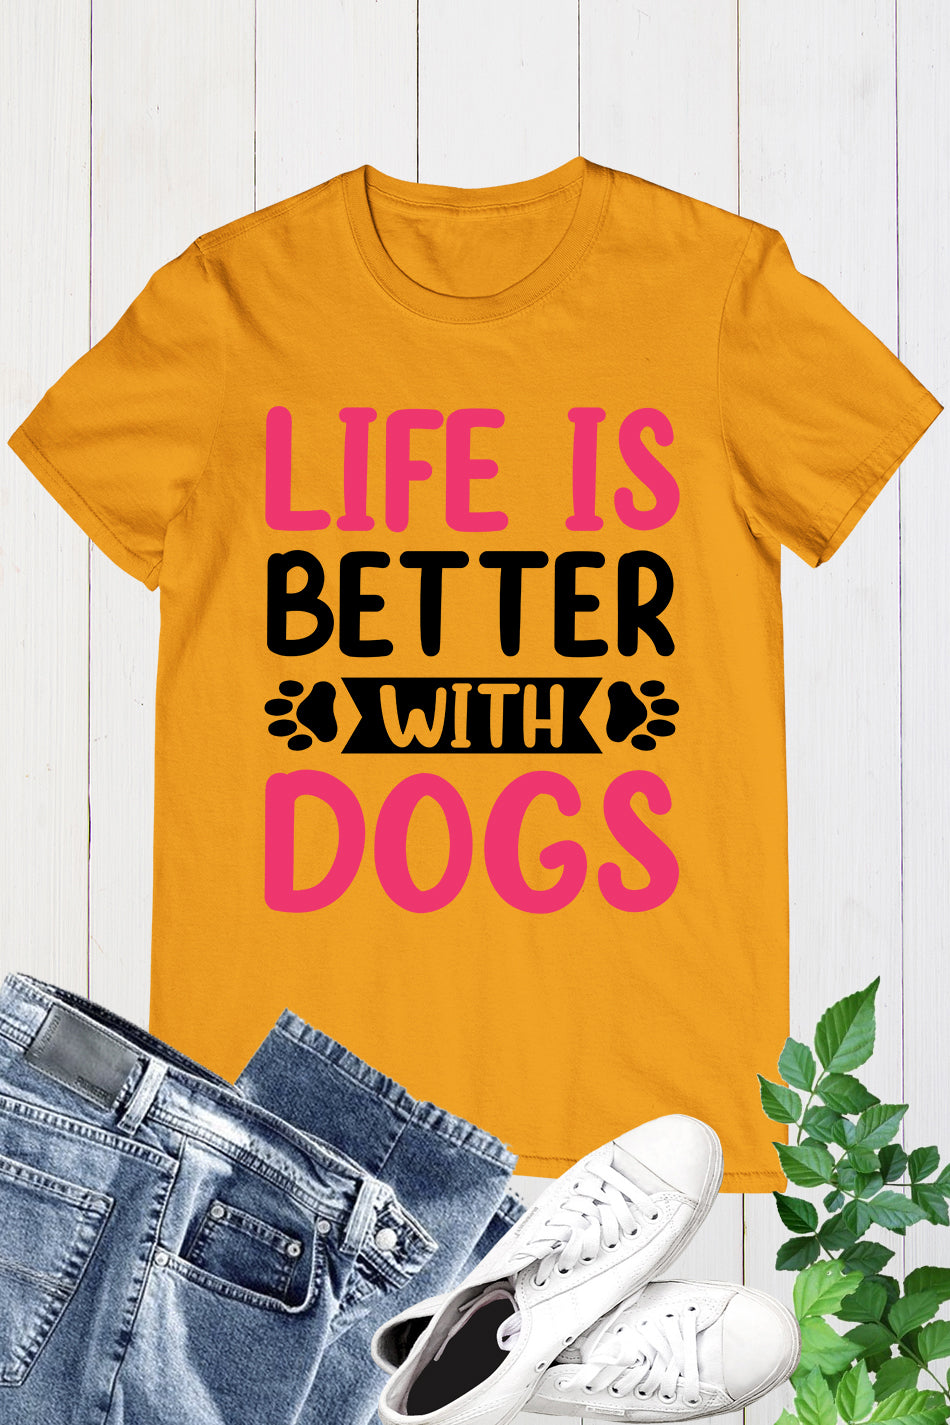 Life is better with my Dogs Shirt